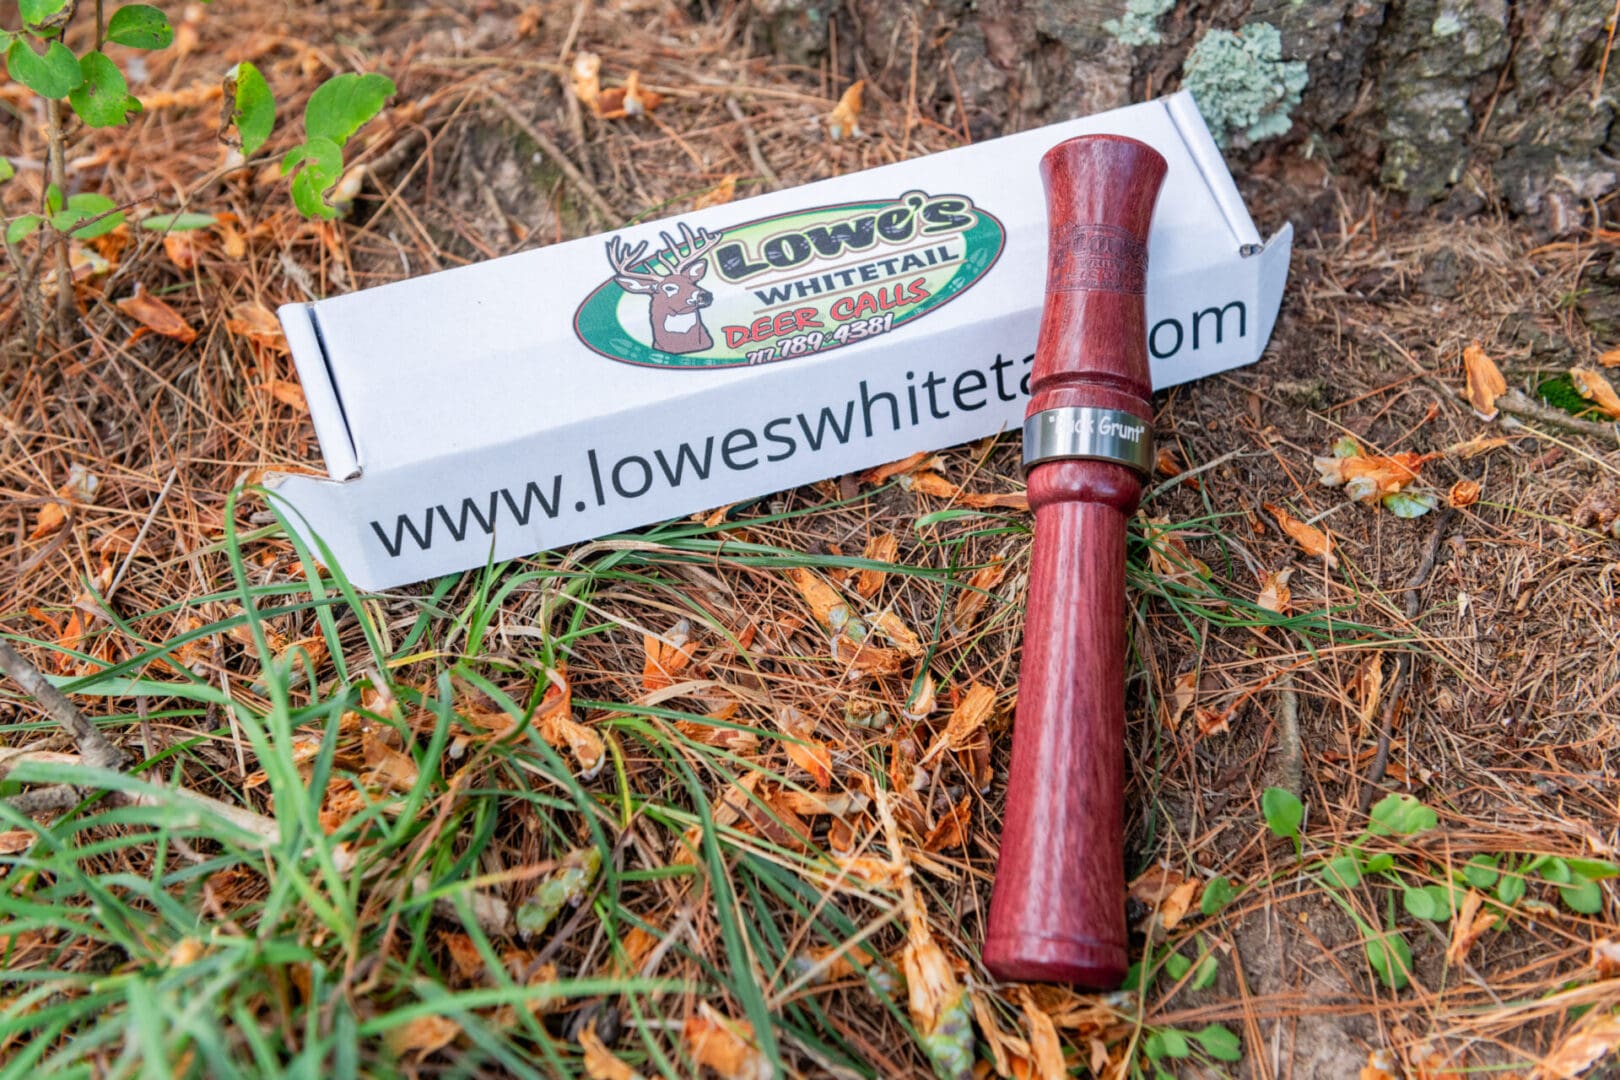 A red pipe laying in the grass next to a box of matches.